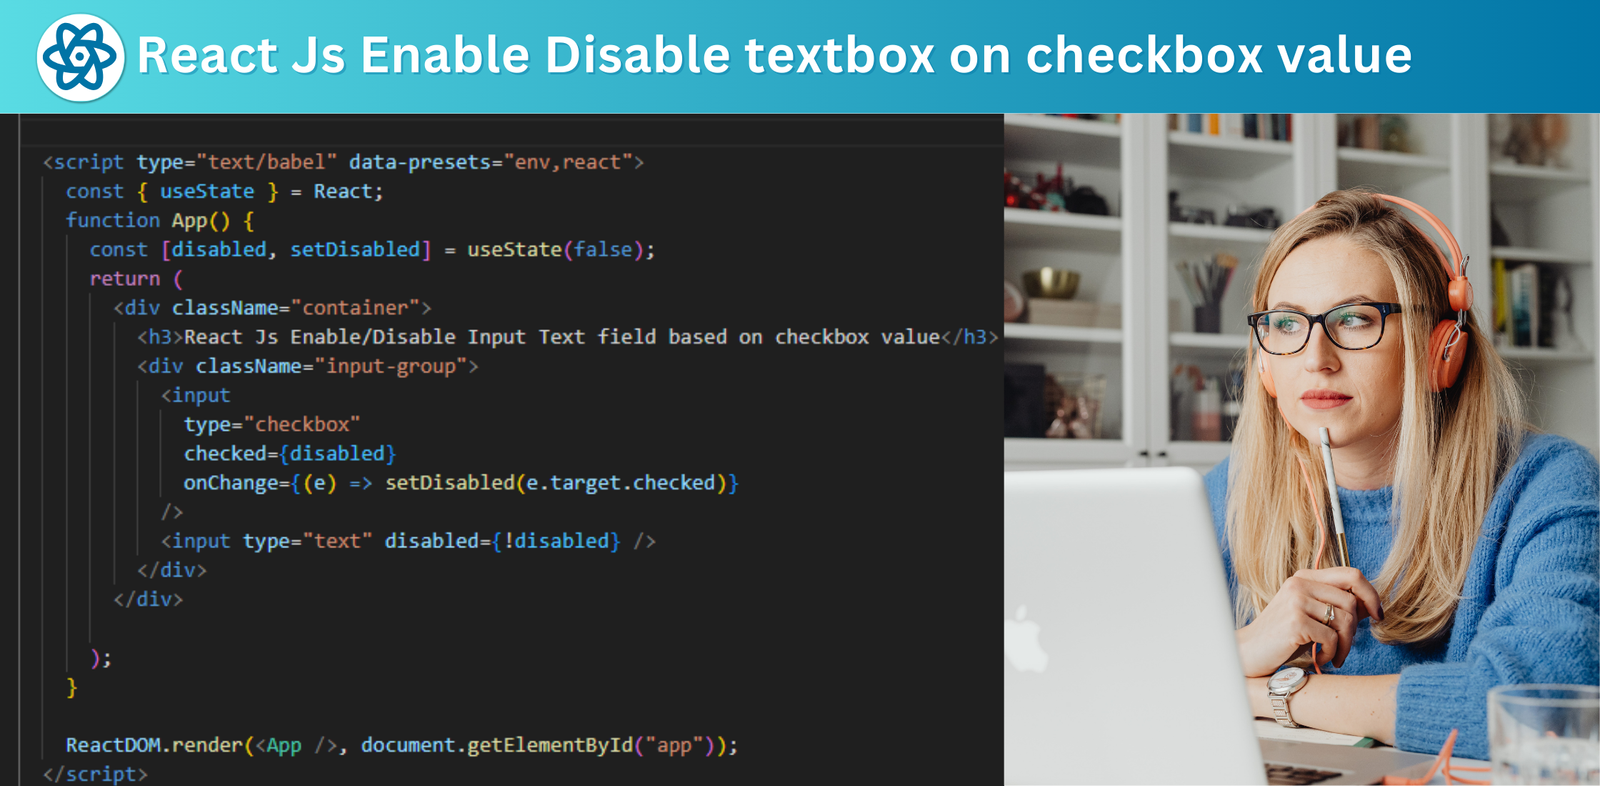 React Js Enable Disable Textbox on Checkbox Value